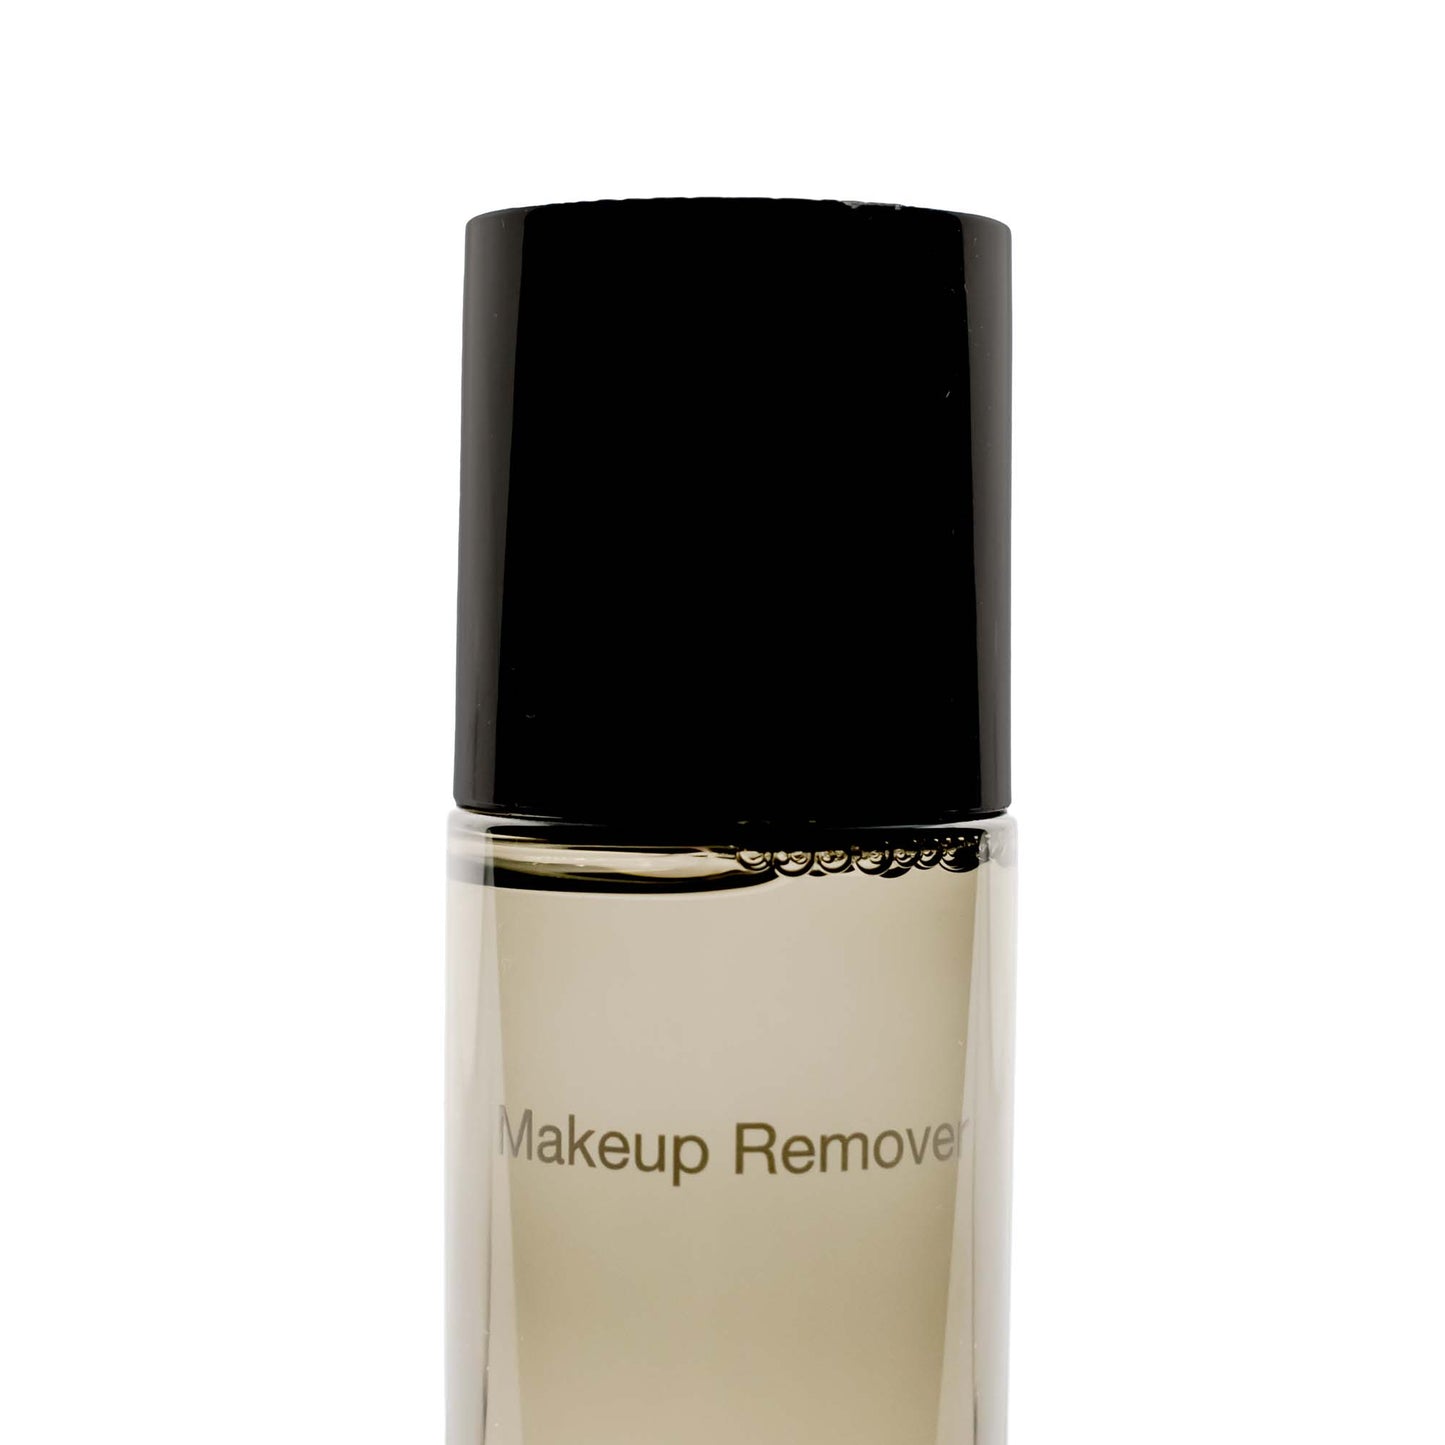 Reviving lightweight formula, you will see how the removal solution works quickly to remove the makeup savvy off  your skin. Swoop away makeup without the oily residue,  reapply makeup immediately after cleansing! Keep your delicate skin feeling soft, fresh and clean with Cruisin Organics Makeup Remover!